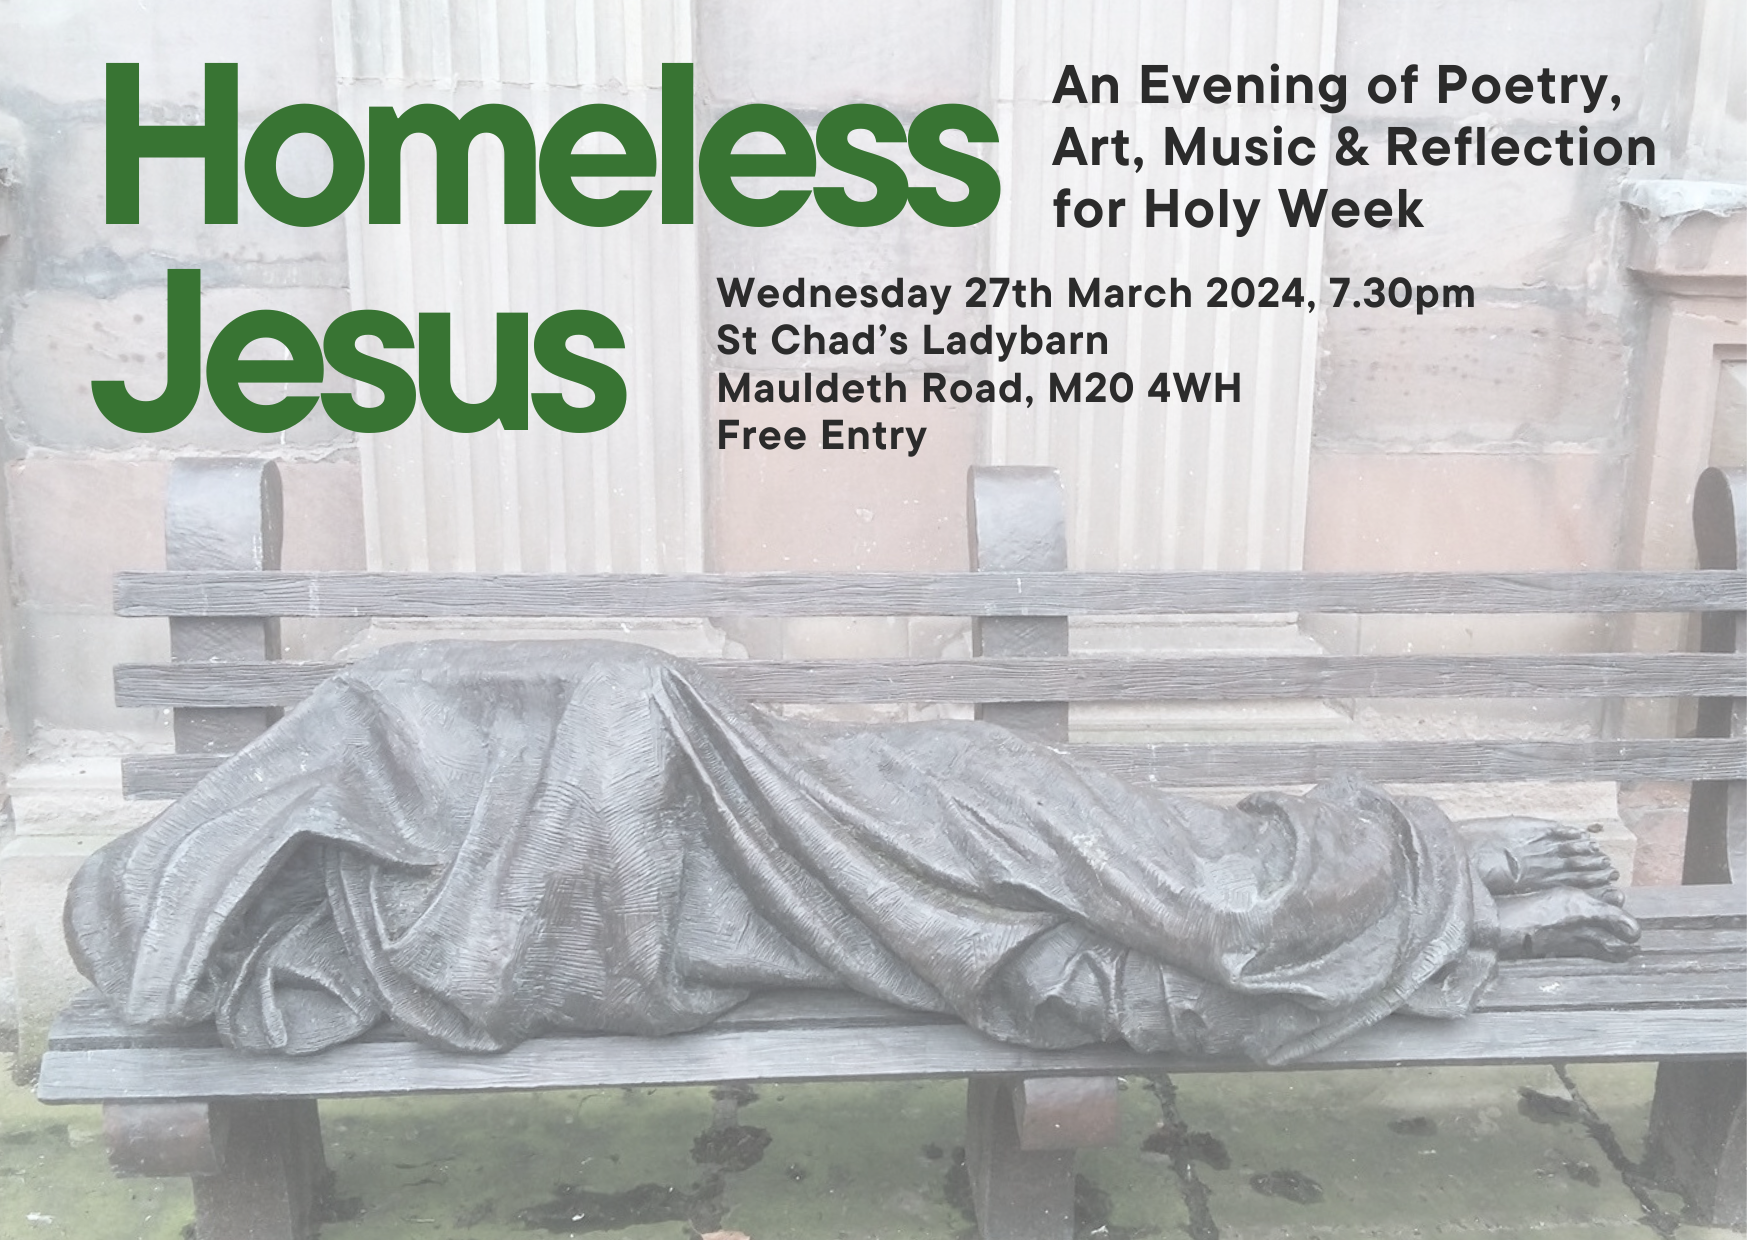 Advert for "Homeless Jesus: An evening of poetry, art, music and reflection for Holy Week, Wednesday 27th March 2024 7.30pm, St Chad's Ladybarn", background image of Homeless Jesus sculpture outside St Ann's Church in Manchester.